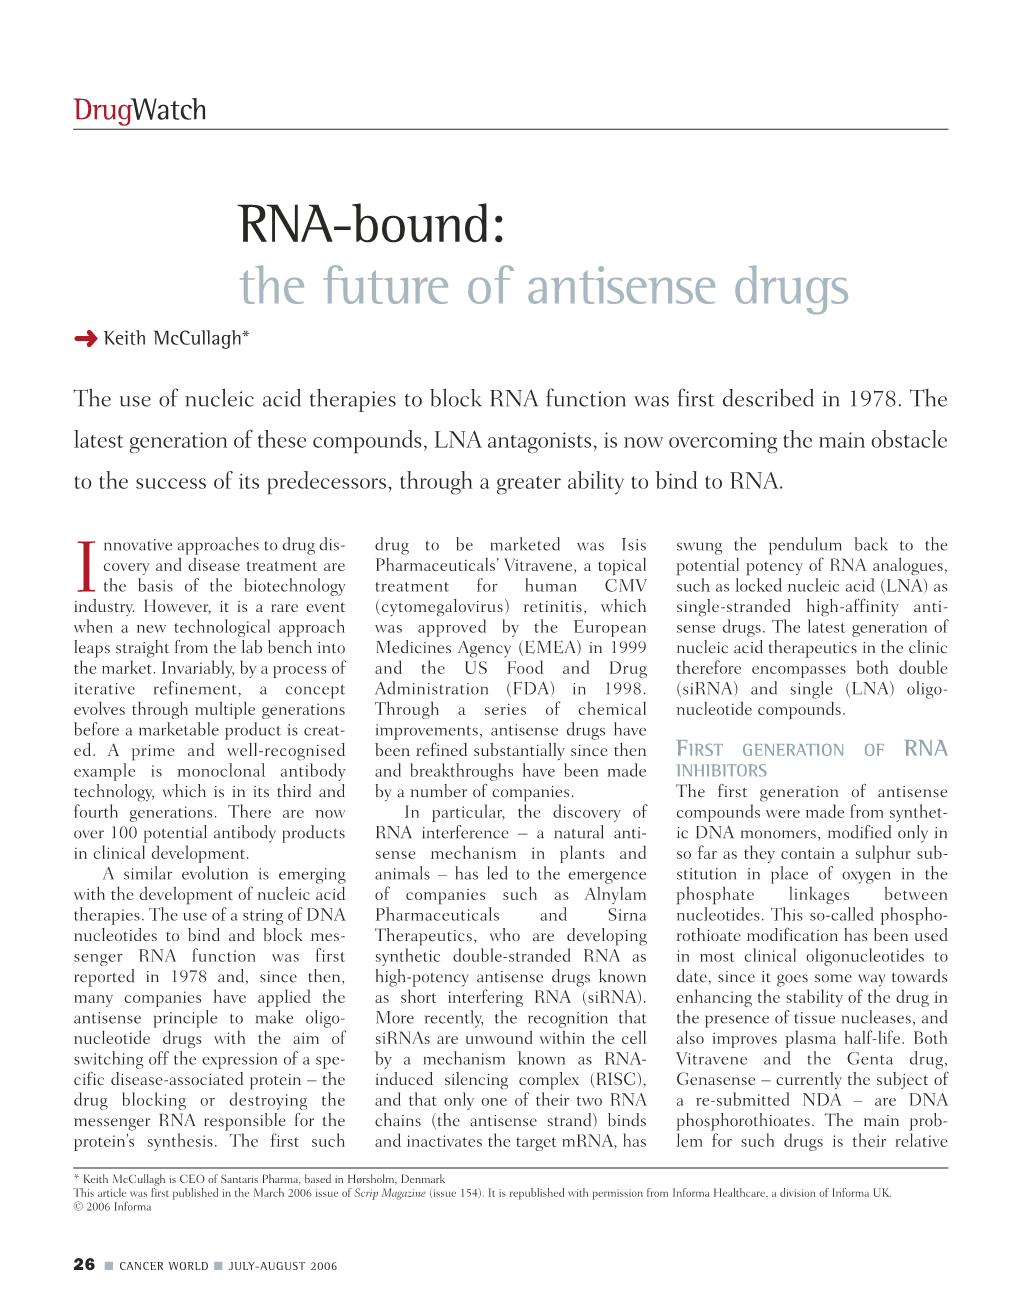 RNA-Bound: the Future of Antisense Drugs ➜ Keith Mccullagh*